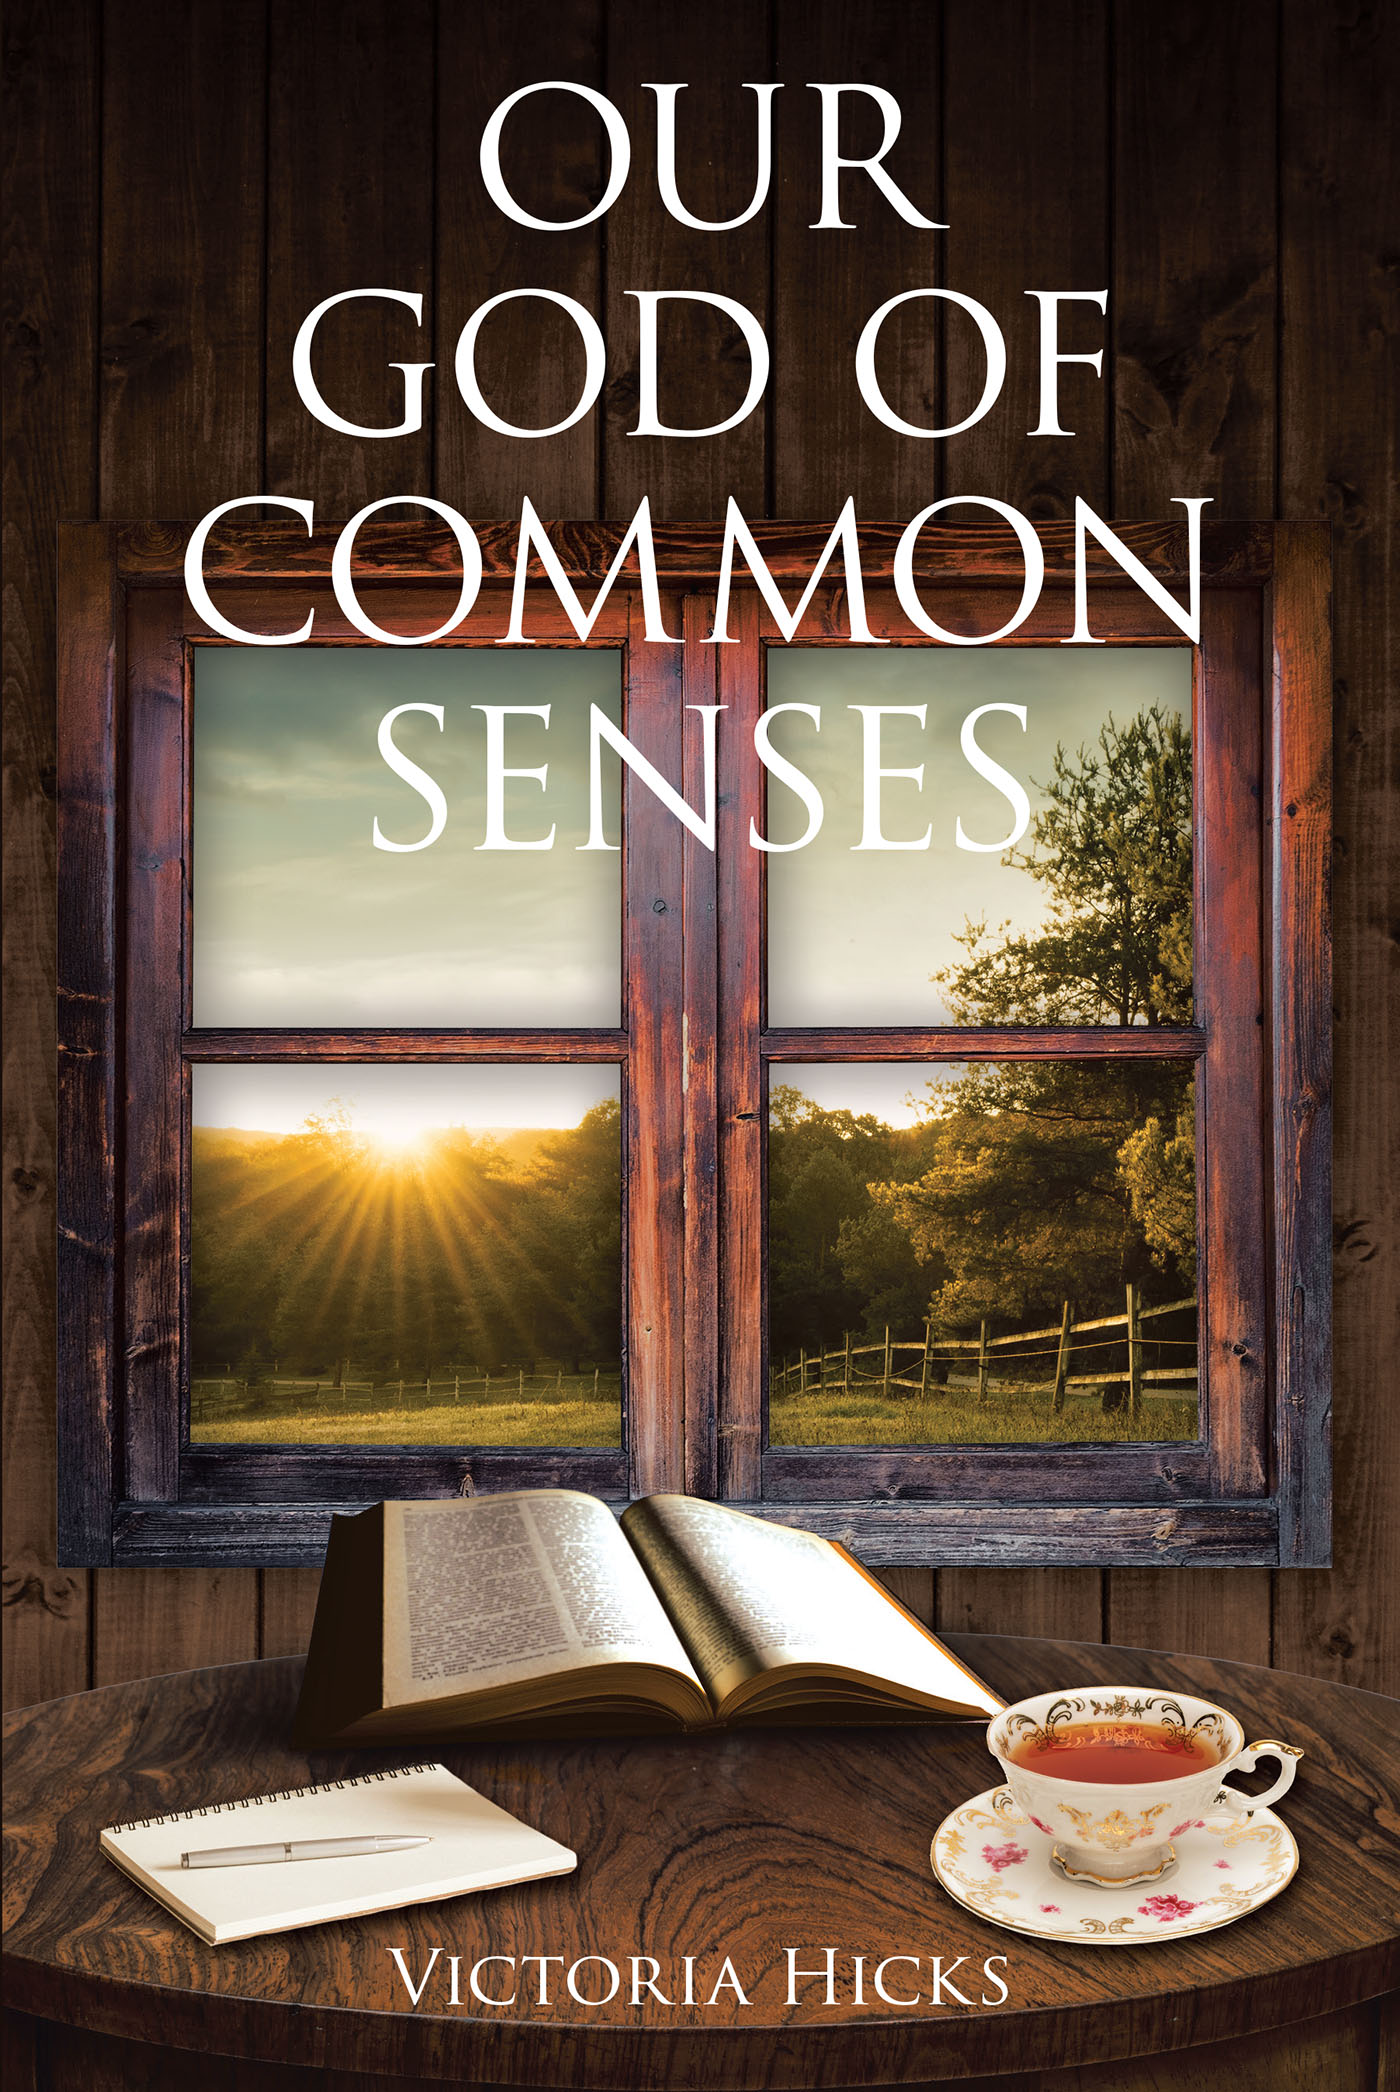 Victoria Hicks’s Newly Released "Our God Of Common Senses" is an Inspiring Collection of Short Devotions That Prove the Goodness of God